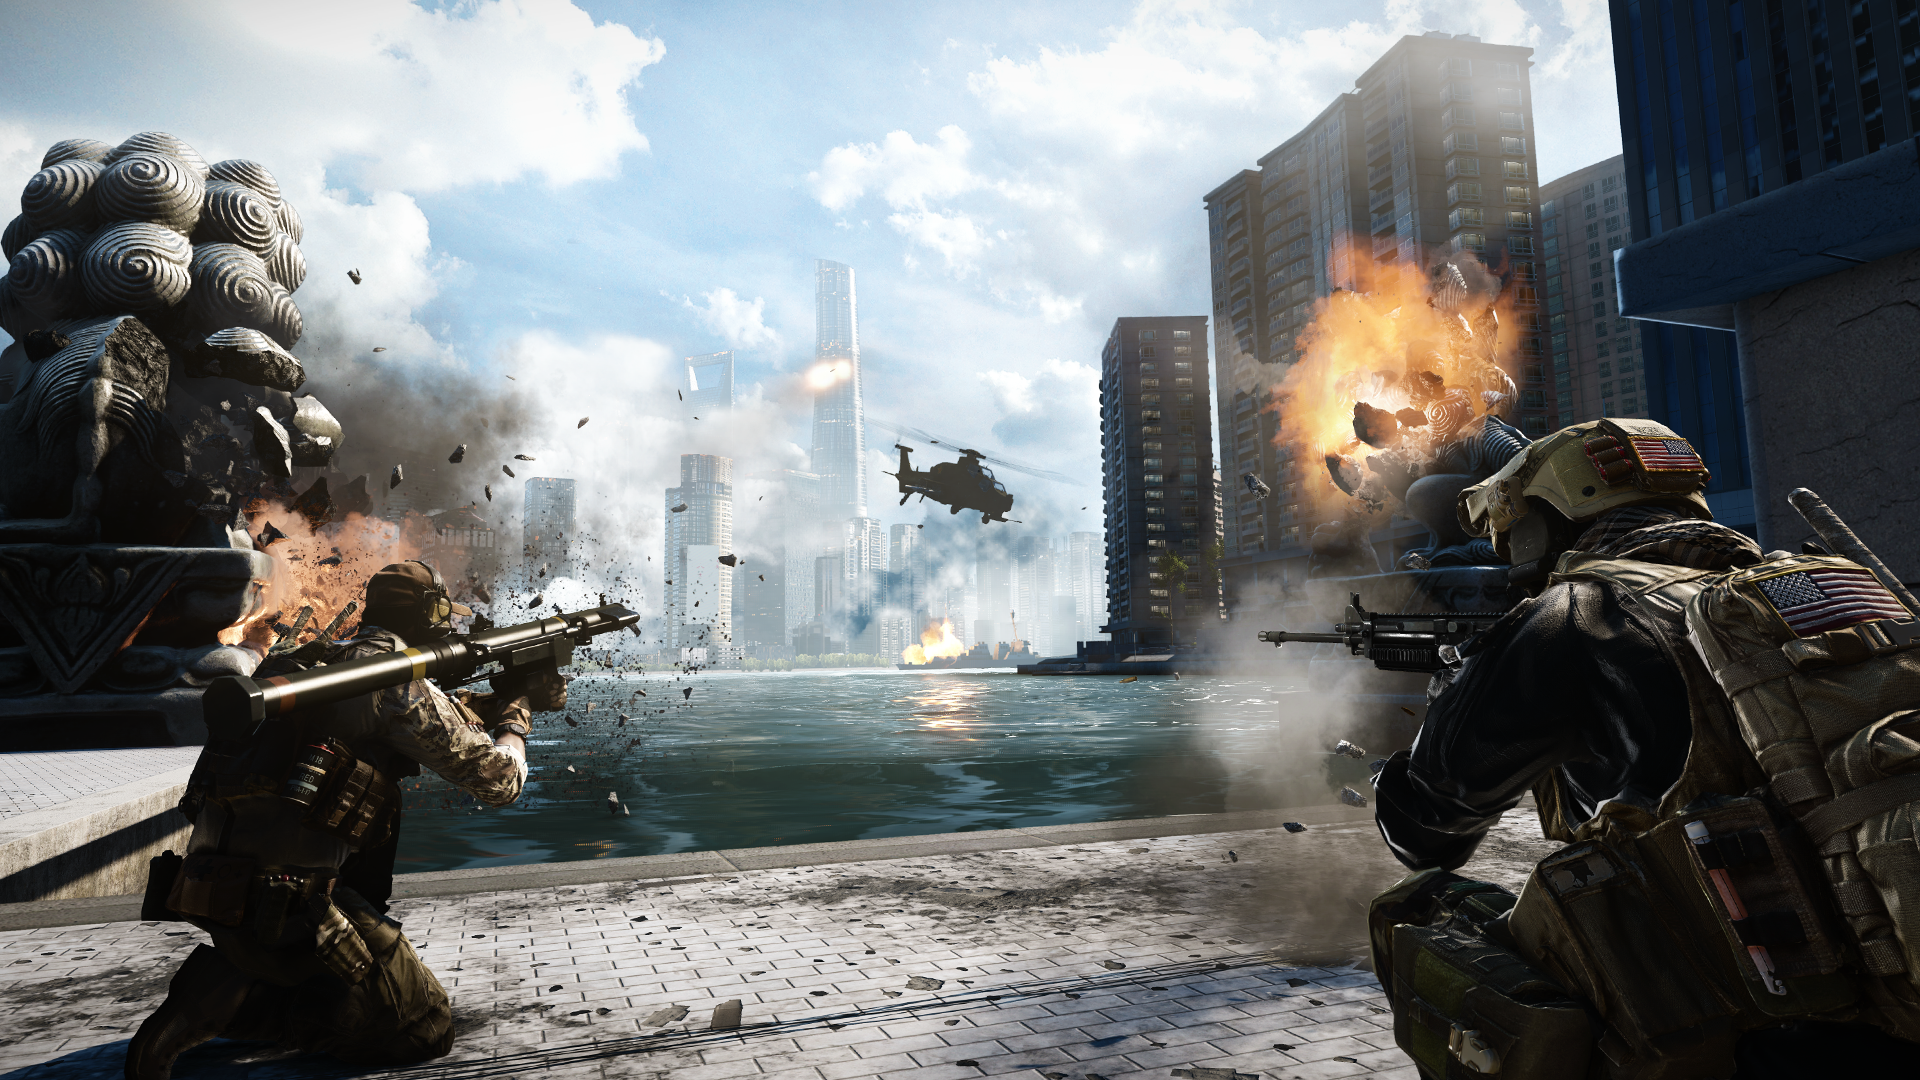 Battlefield 4 on Xbox One should finally be free of one-hit kill bug after todays patch